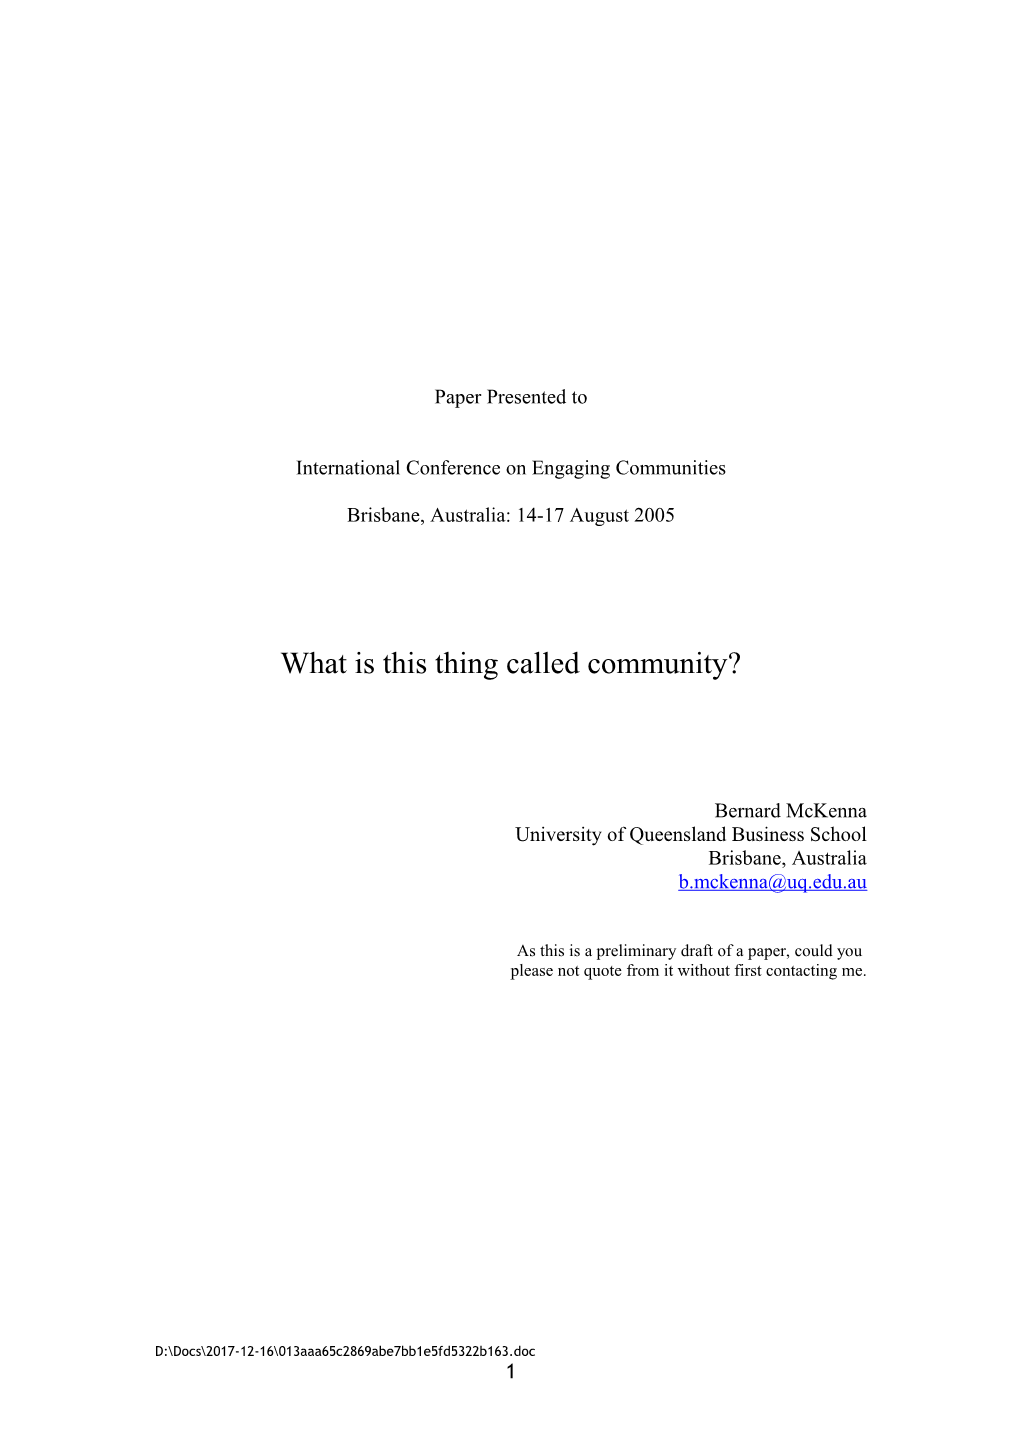 International Conference on Engaging Communities